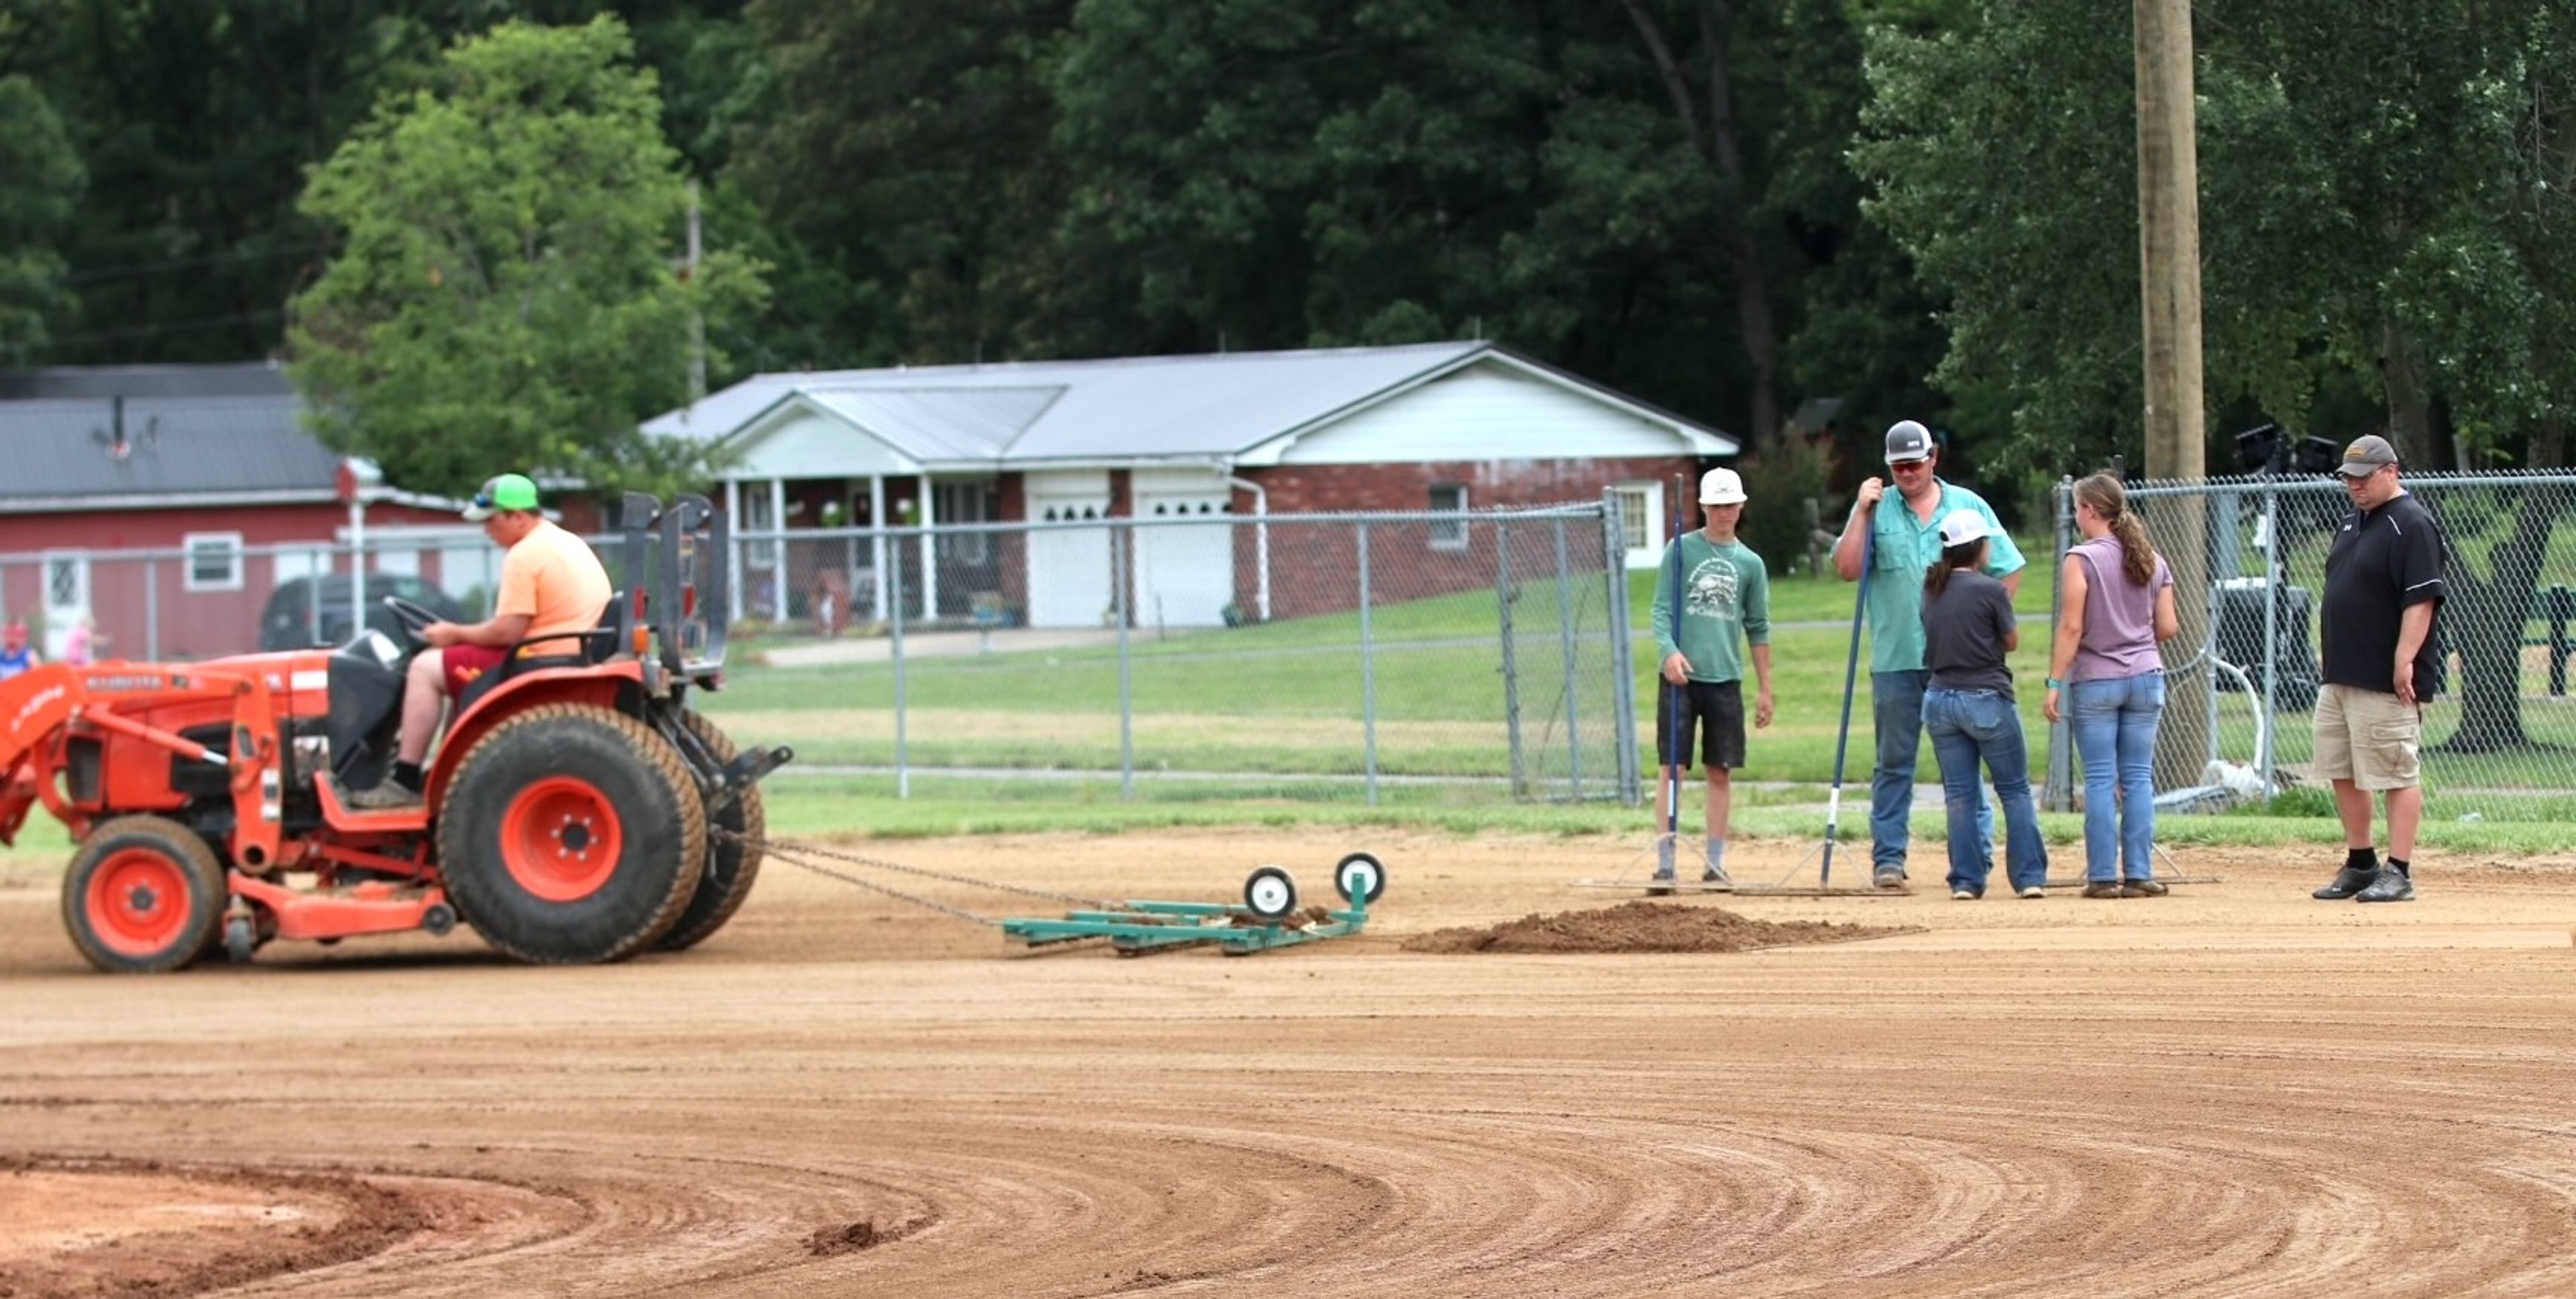 
High school volunteers Garrett Brown, Ava Jansen, Fayelinn Brown, Jacob Cureton and Shane Jansen prep the field after early morning rain showers Saturday. Alan Beussink checks the progress to determine the field readiness for the next game.